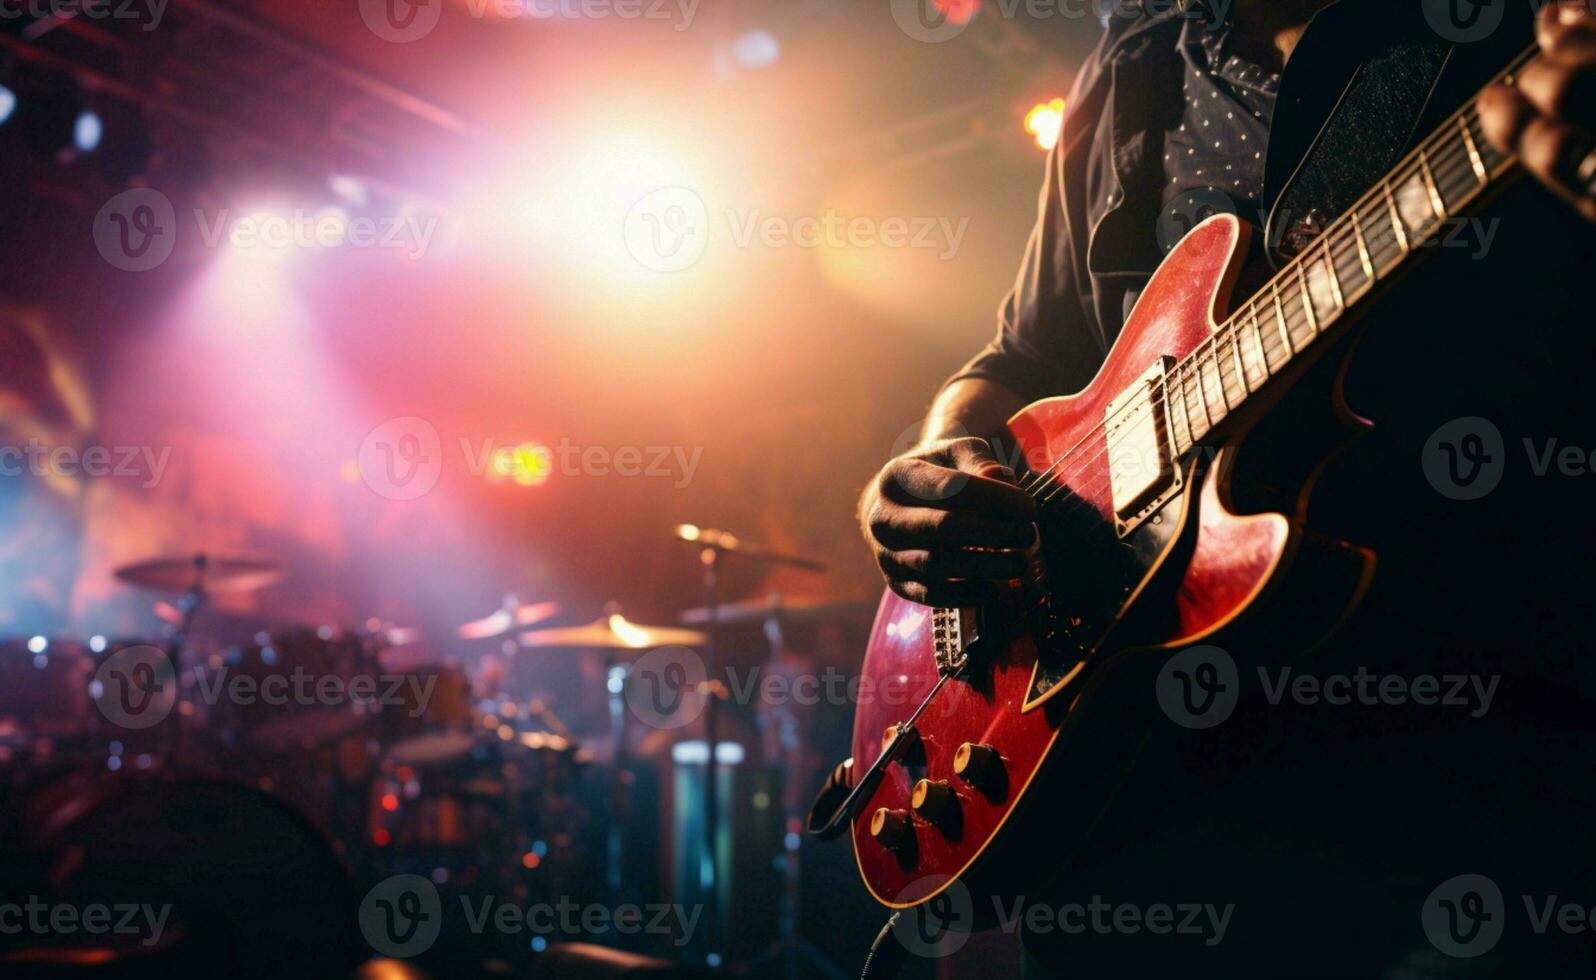 The guitarist's presence shines on stage against a softly blurred background. AI Generated photo